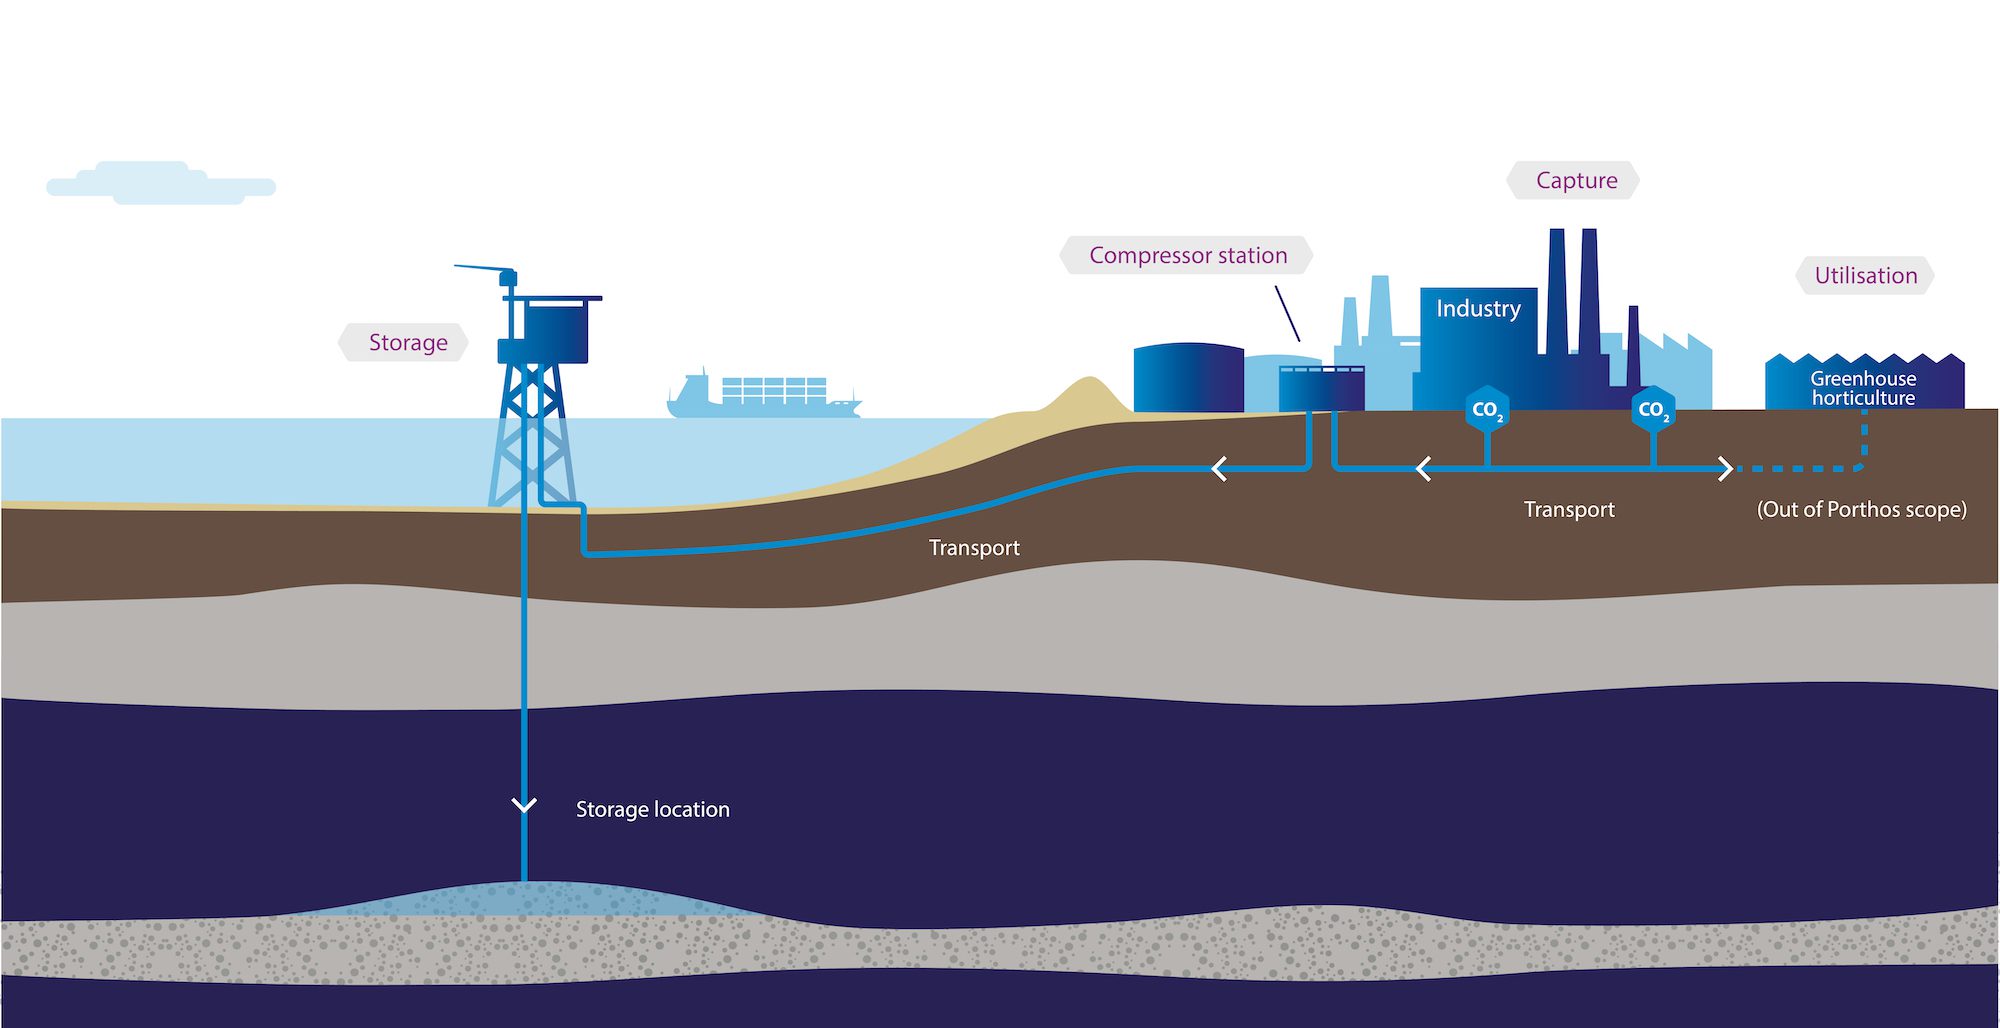 An illustration of the "Porthos" project's Carbon Capture and Storage value chain. Illustration courtesy Porthos CO2 Transport and Storage C.V.